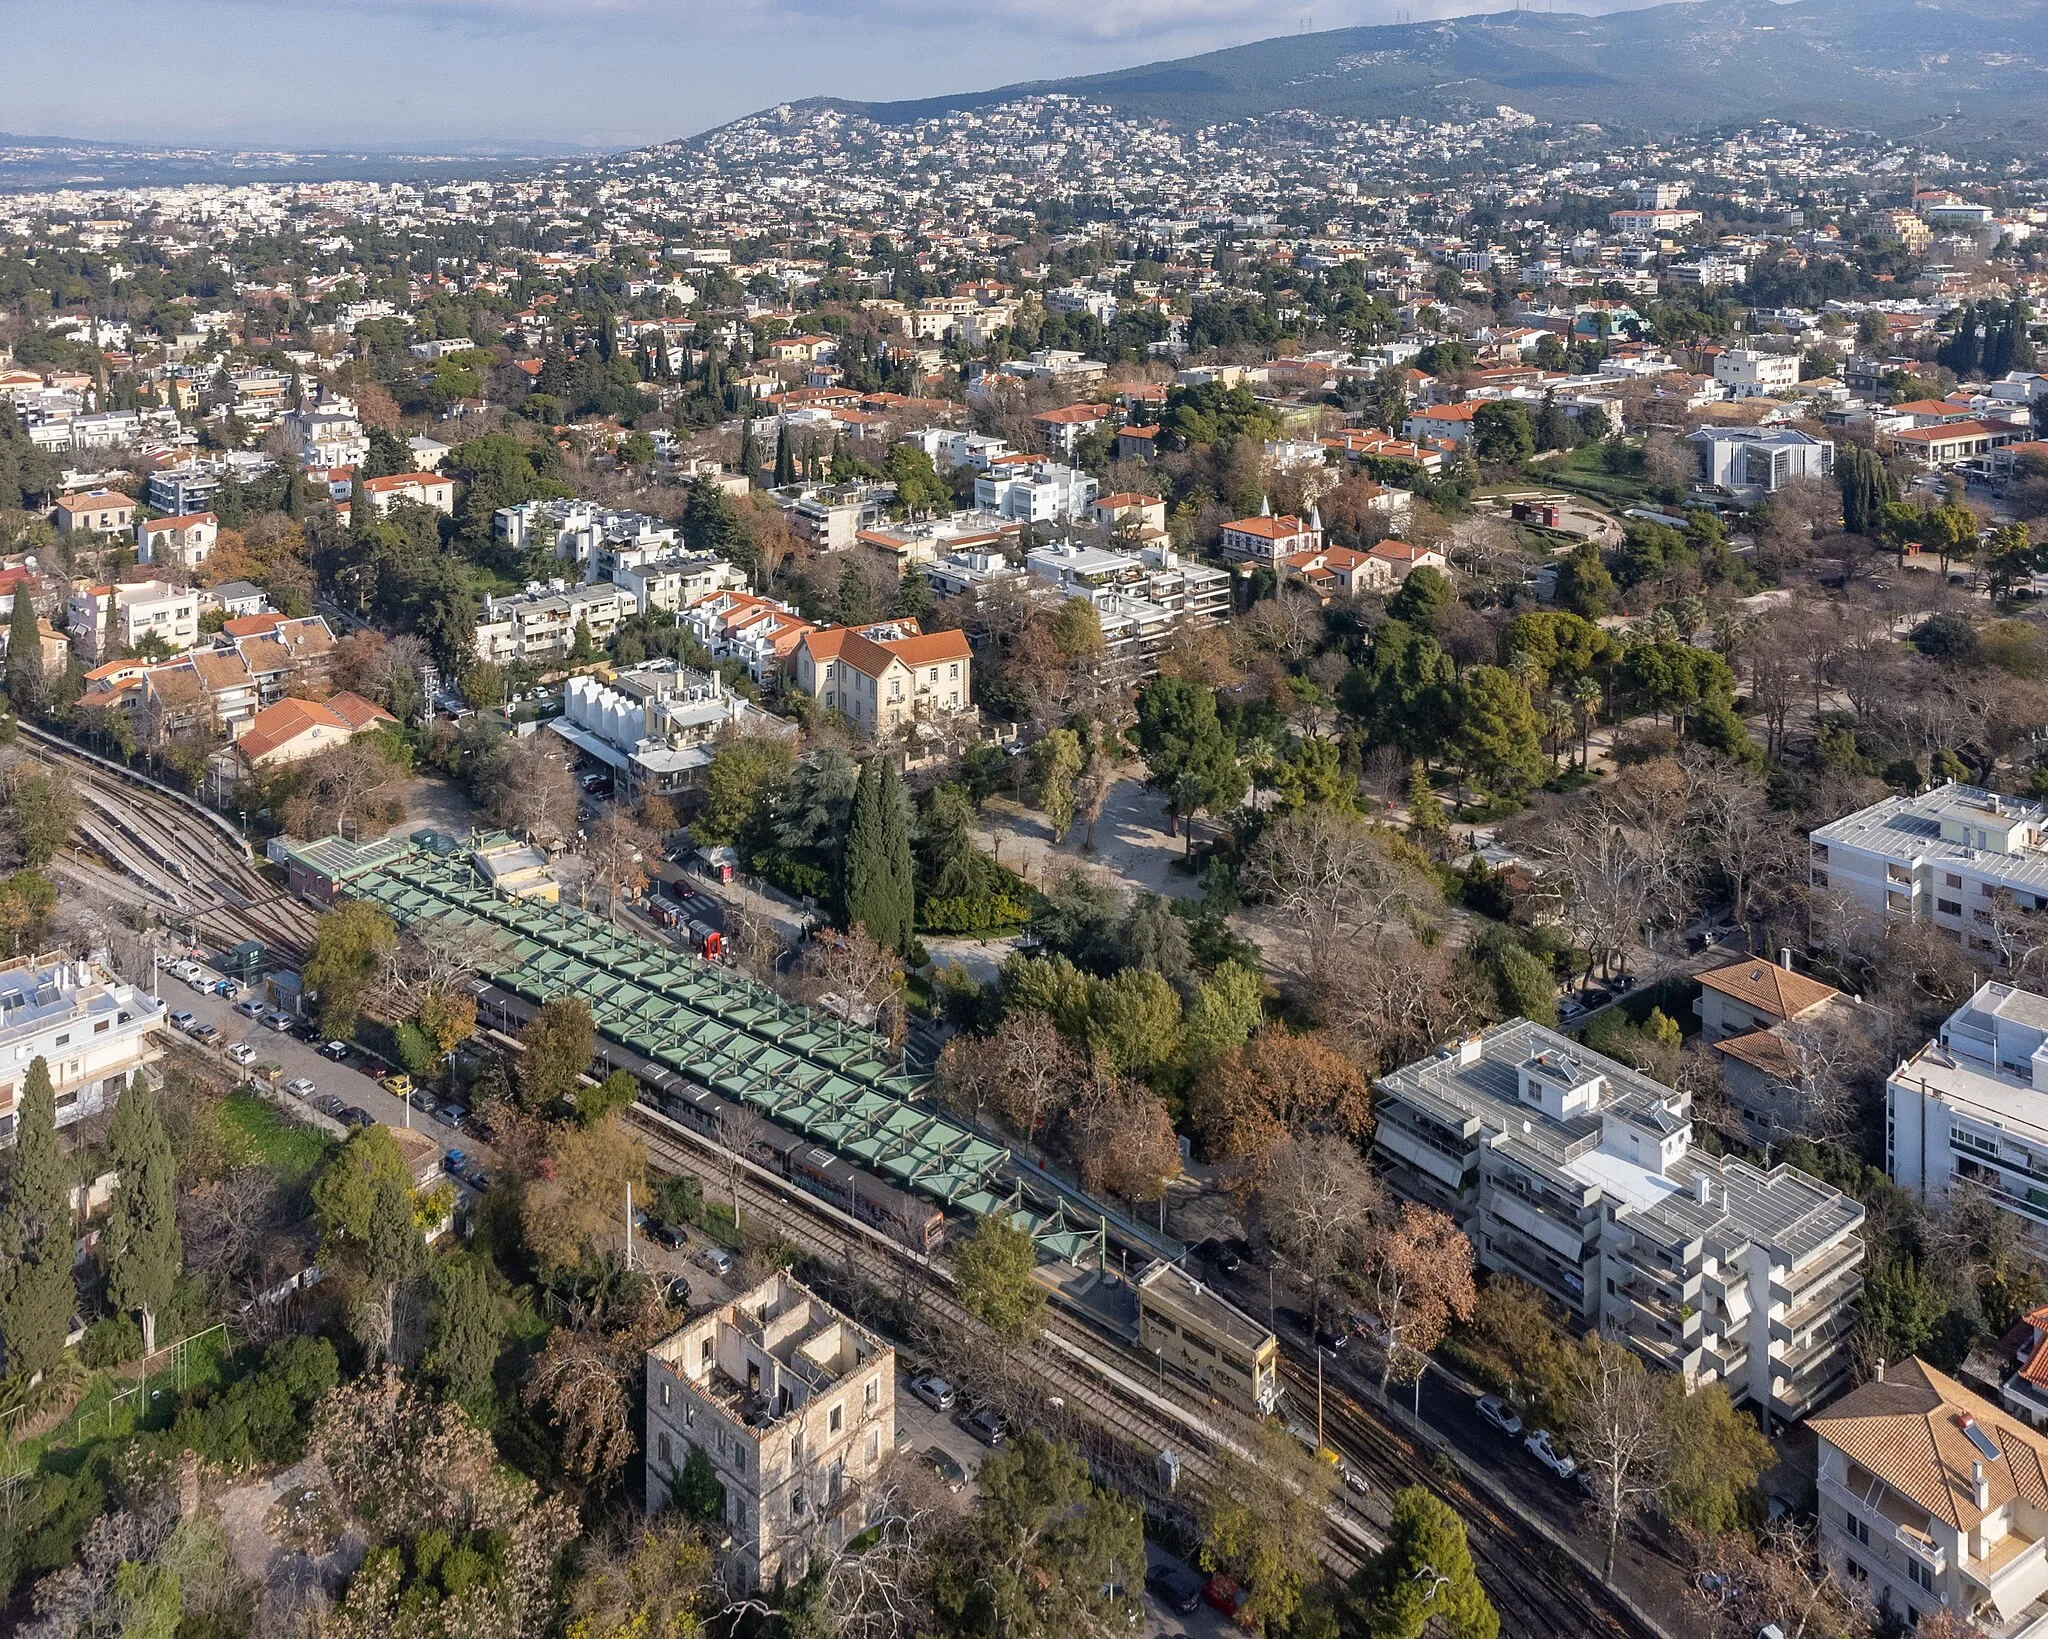 Photo showing: Airview of Kifissia, with the metro station visible in the foreground.